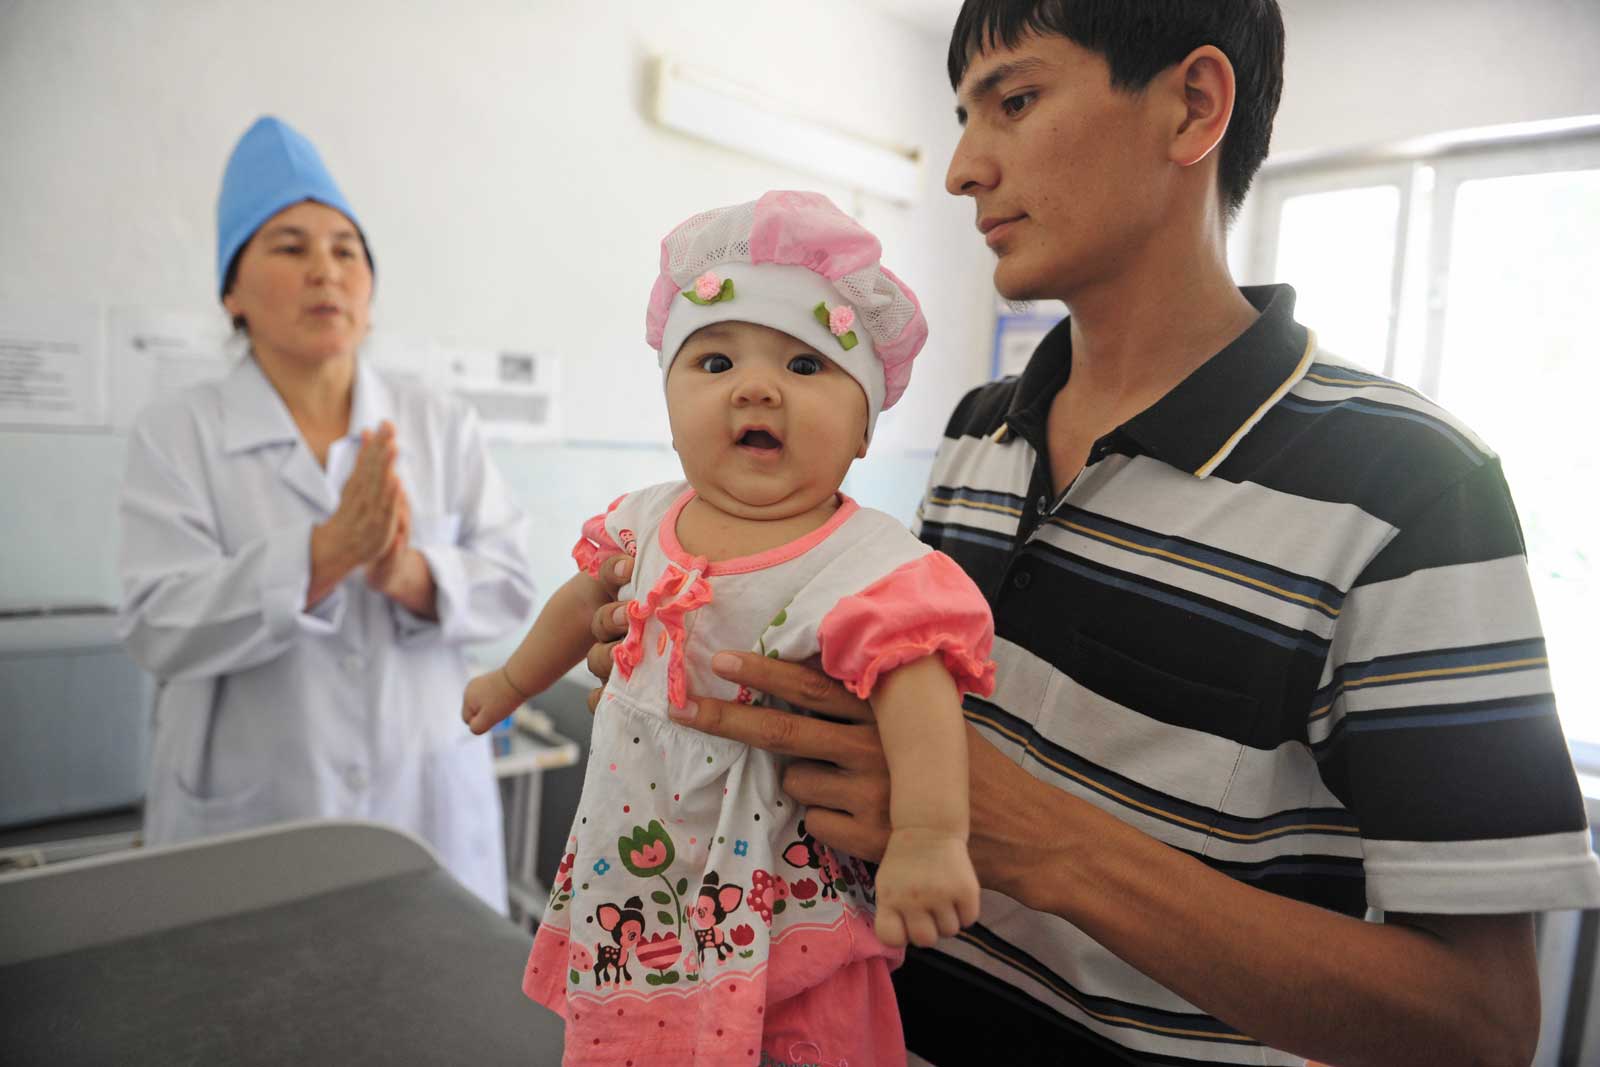  Negative attitudes towards vaccination represent another barrier. At the family medicine centre in Suzak, near Jalalabad, Kamaldin Khurbayev refuses to have his three-month-old daughter Salikha immunised on religious grounds. Later, a doctor at the centre will change his mind.